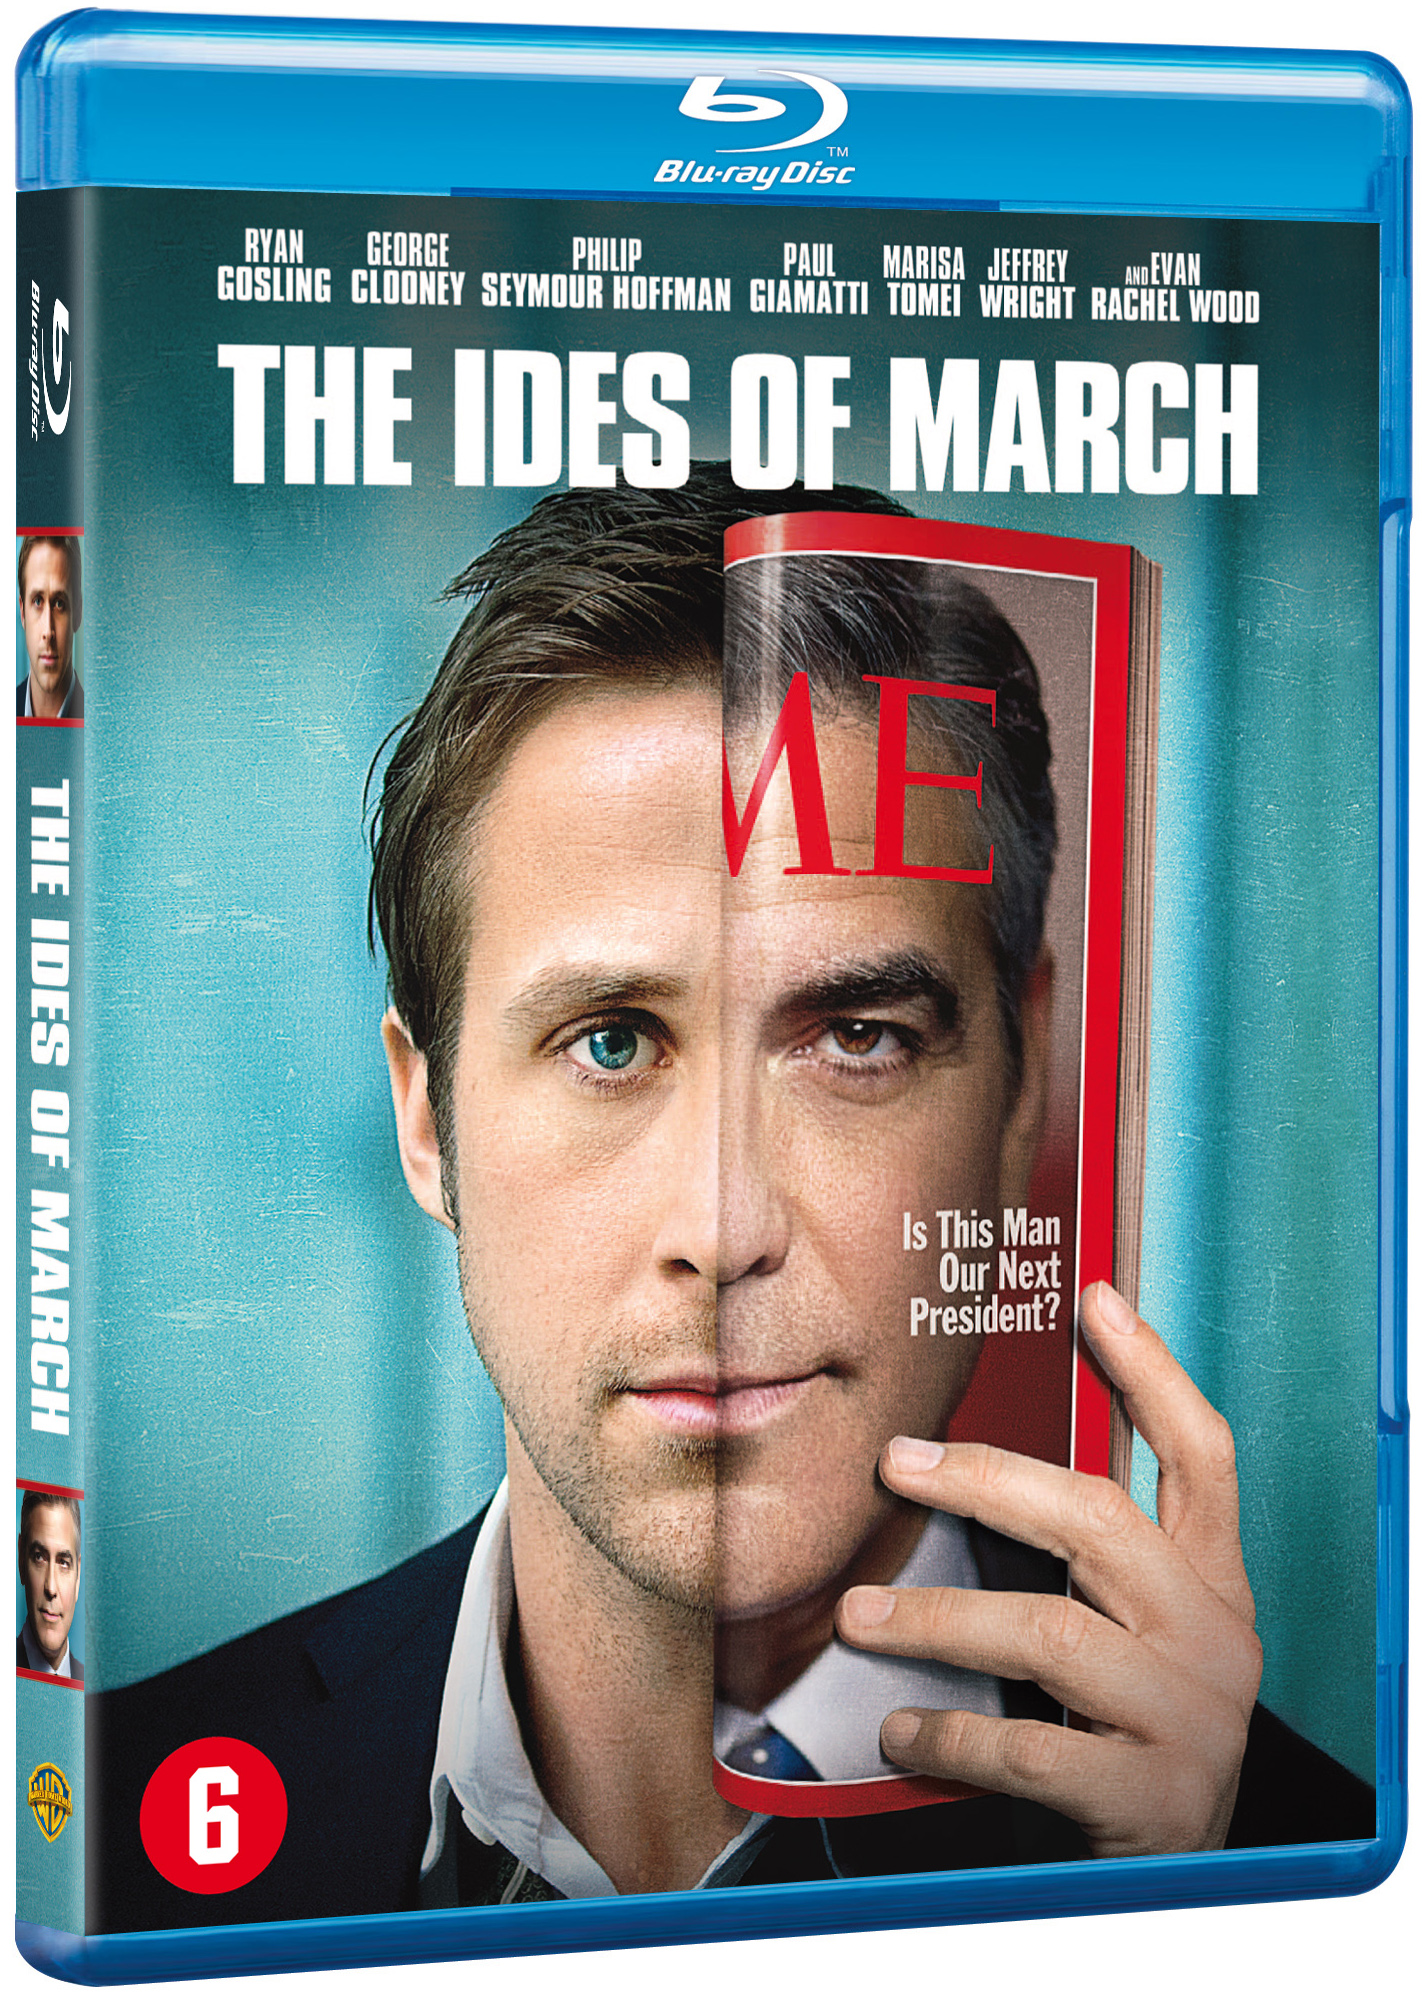 The Ides of March (2011) ***½ op blu-ray | | De FilmBlog